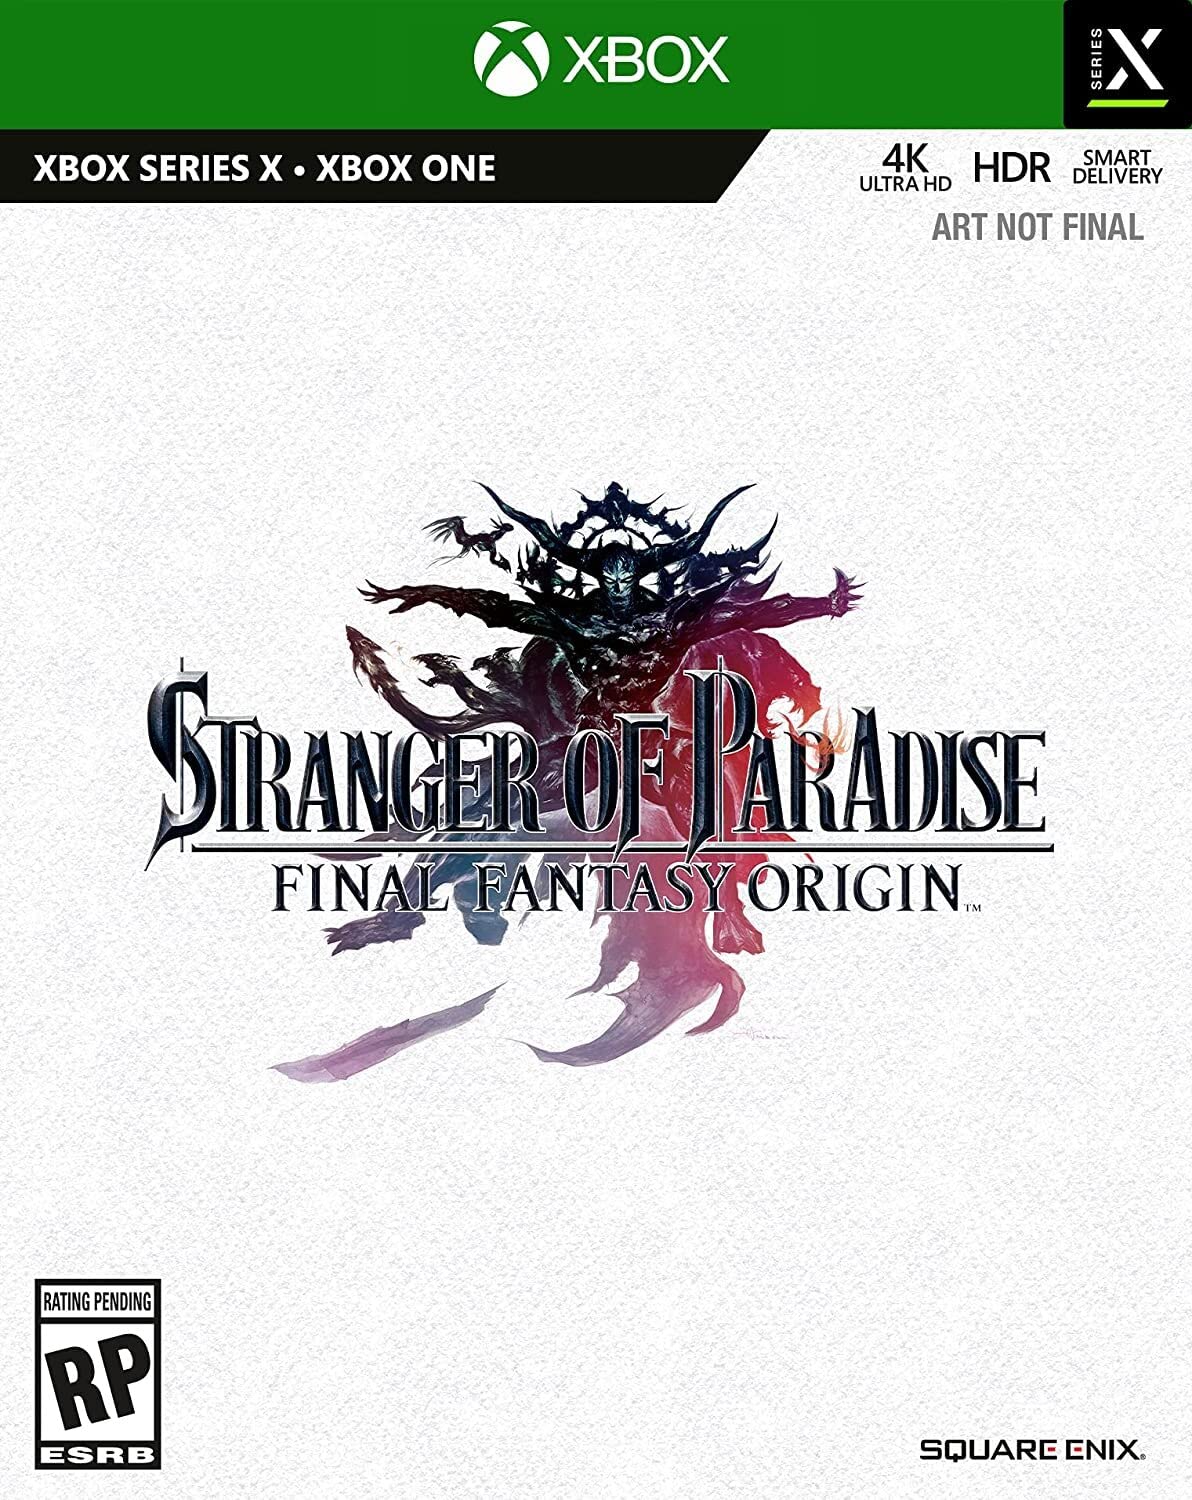 Stranger of Paradise Final Fantasy Origin (PS4, Xbox Series X / One) $20 + Free Shipping w/ Target Red Card or $35+